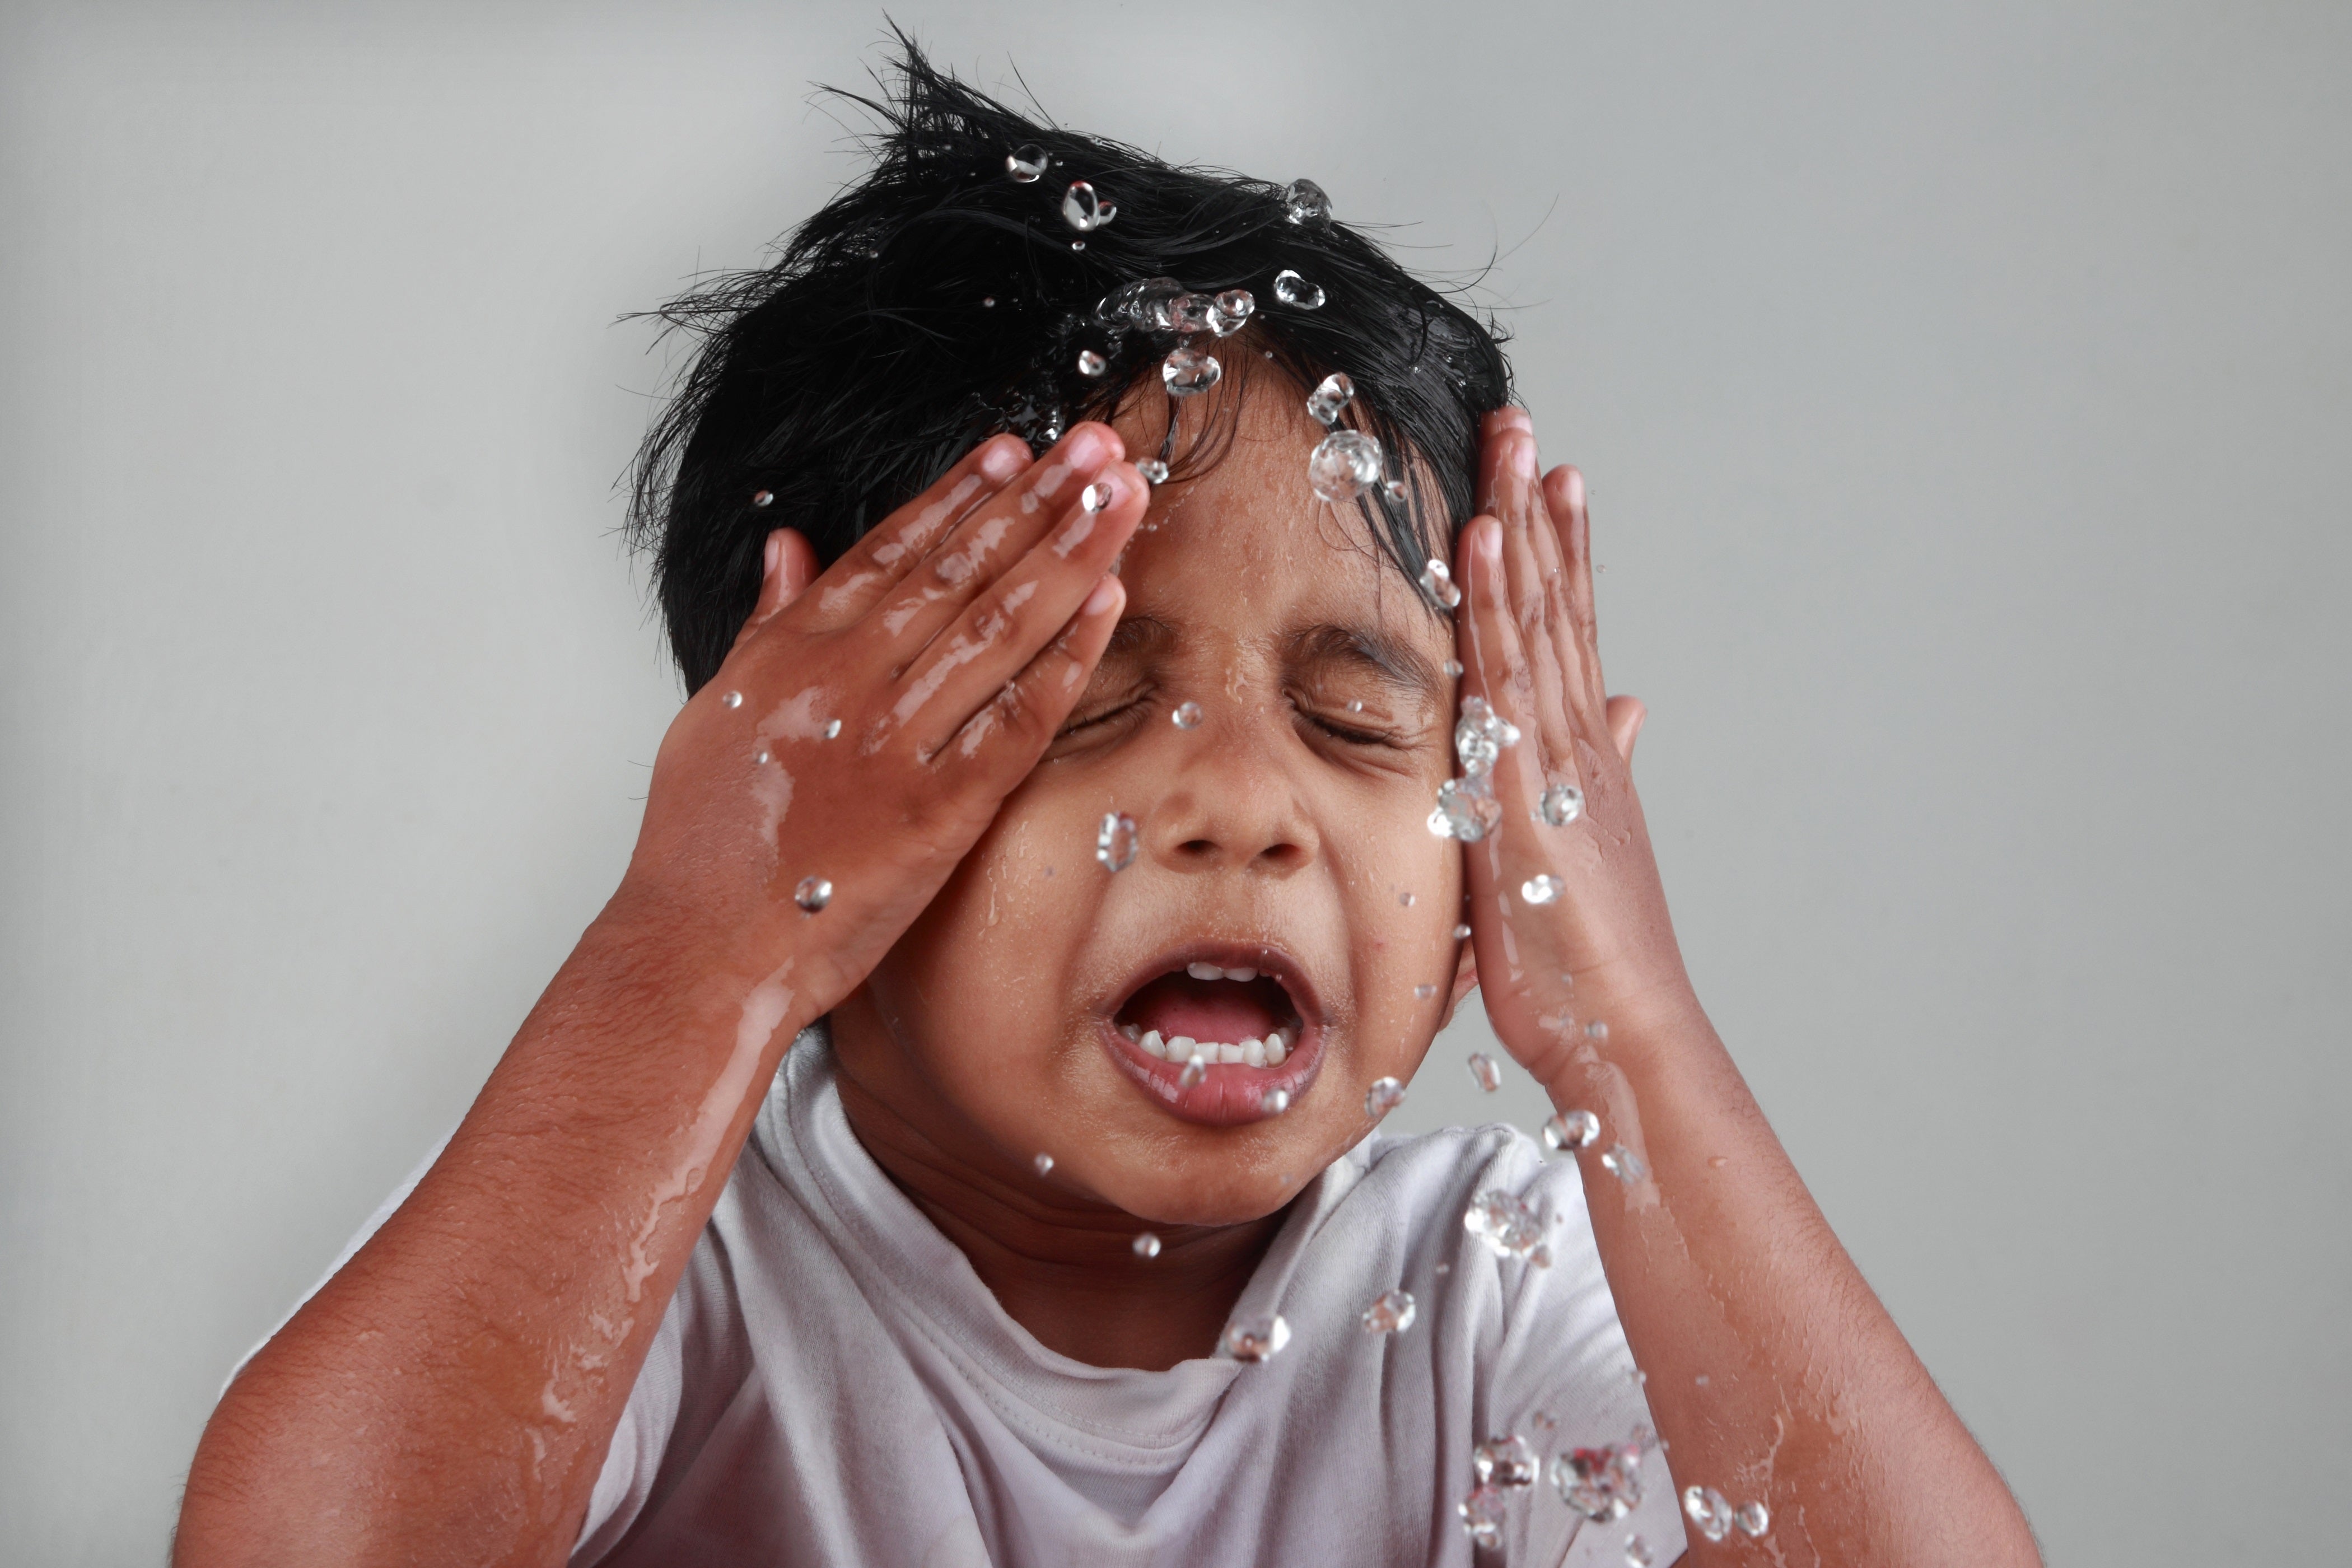 Boy splashing face with water - small